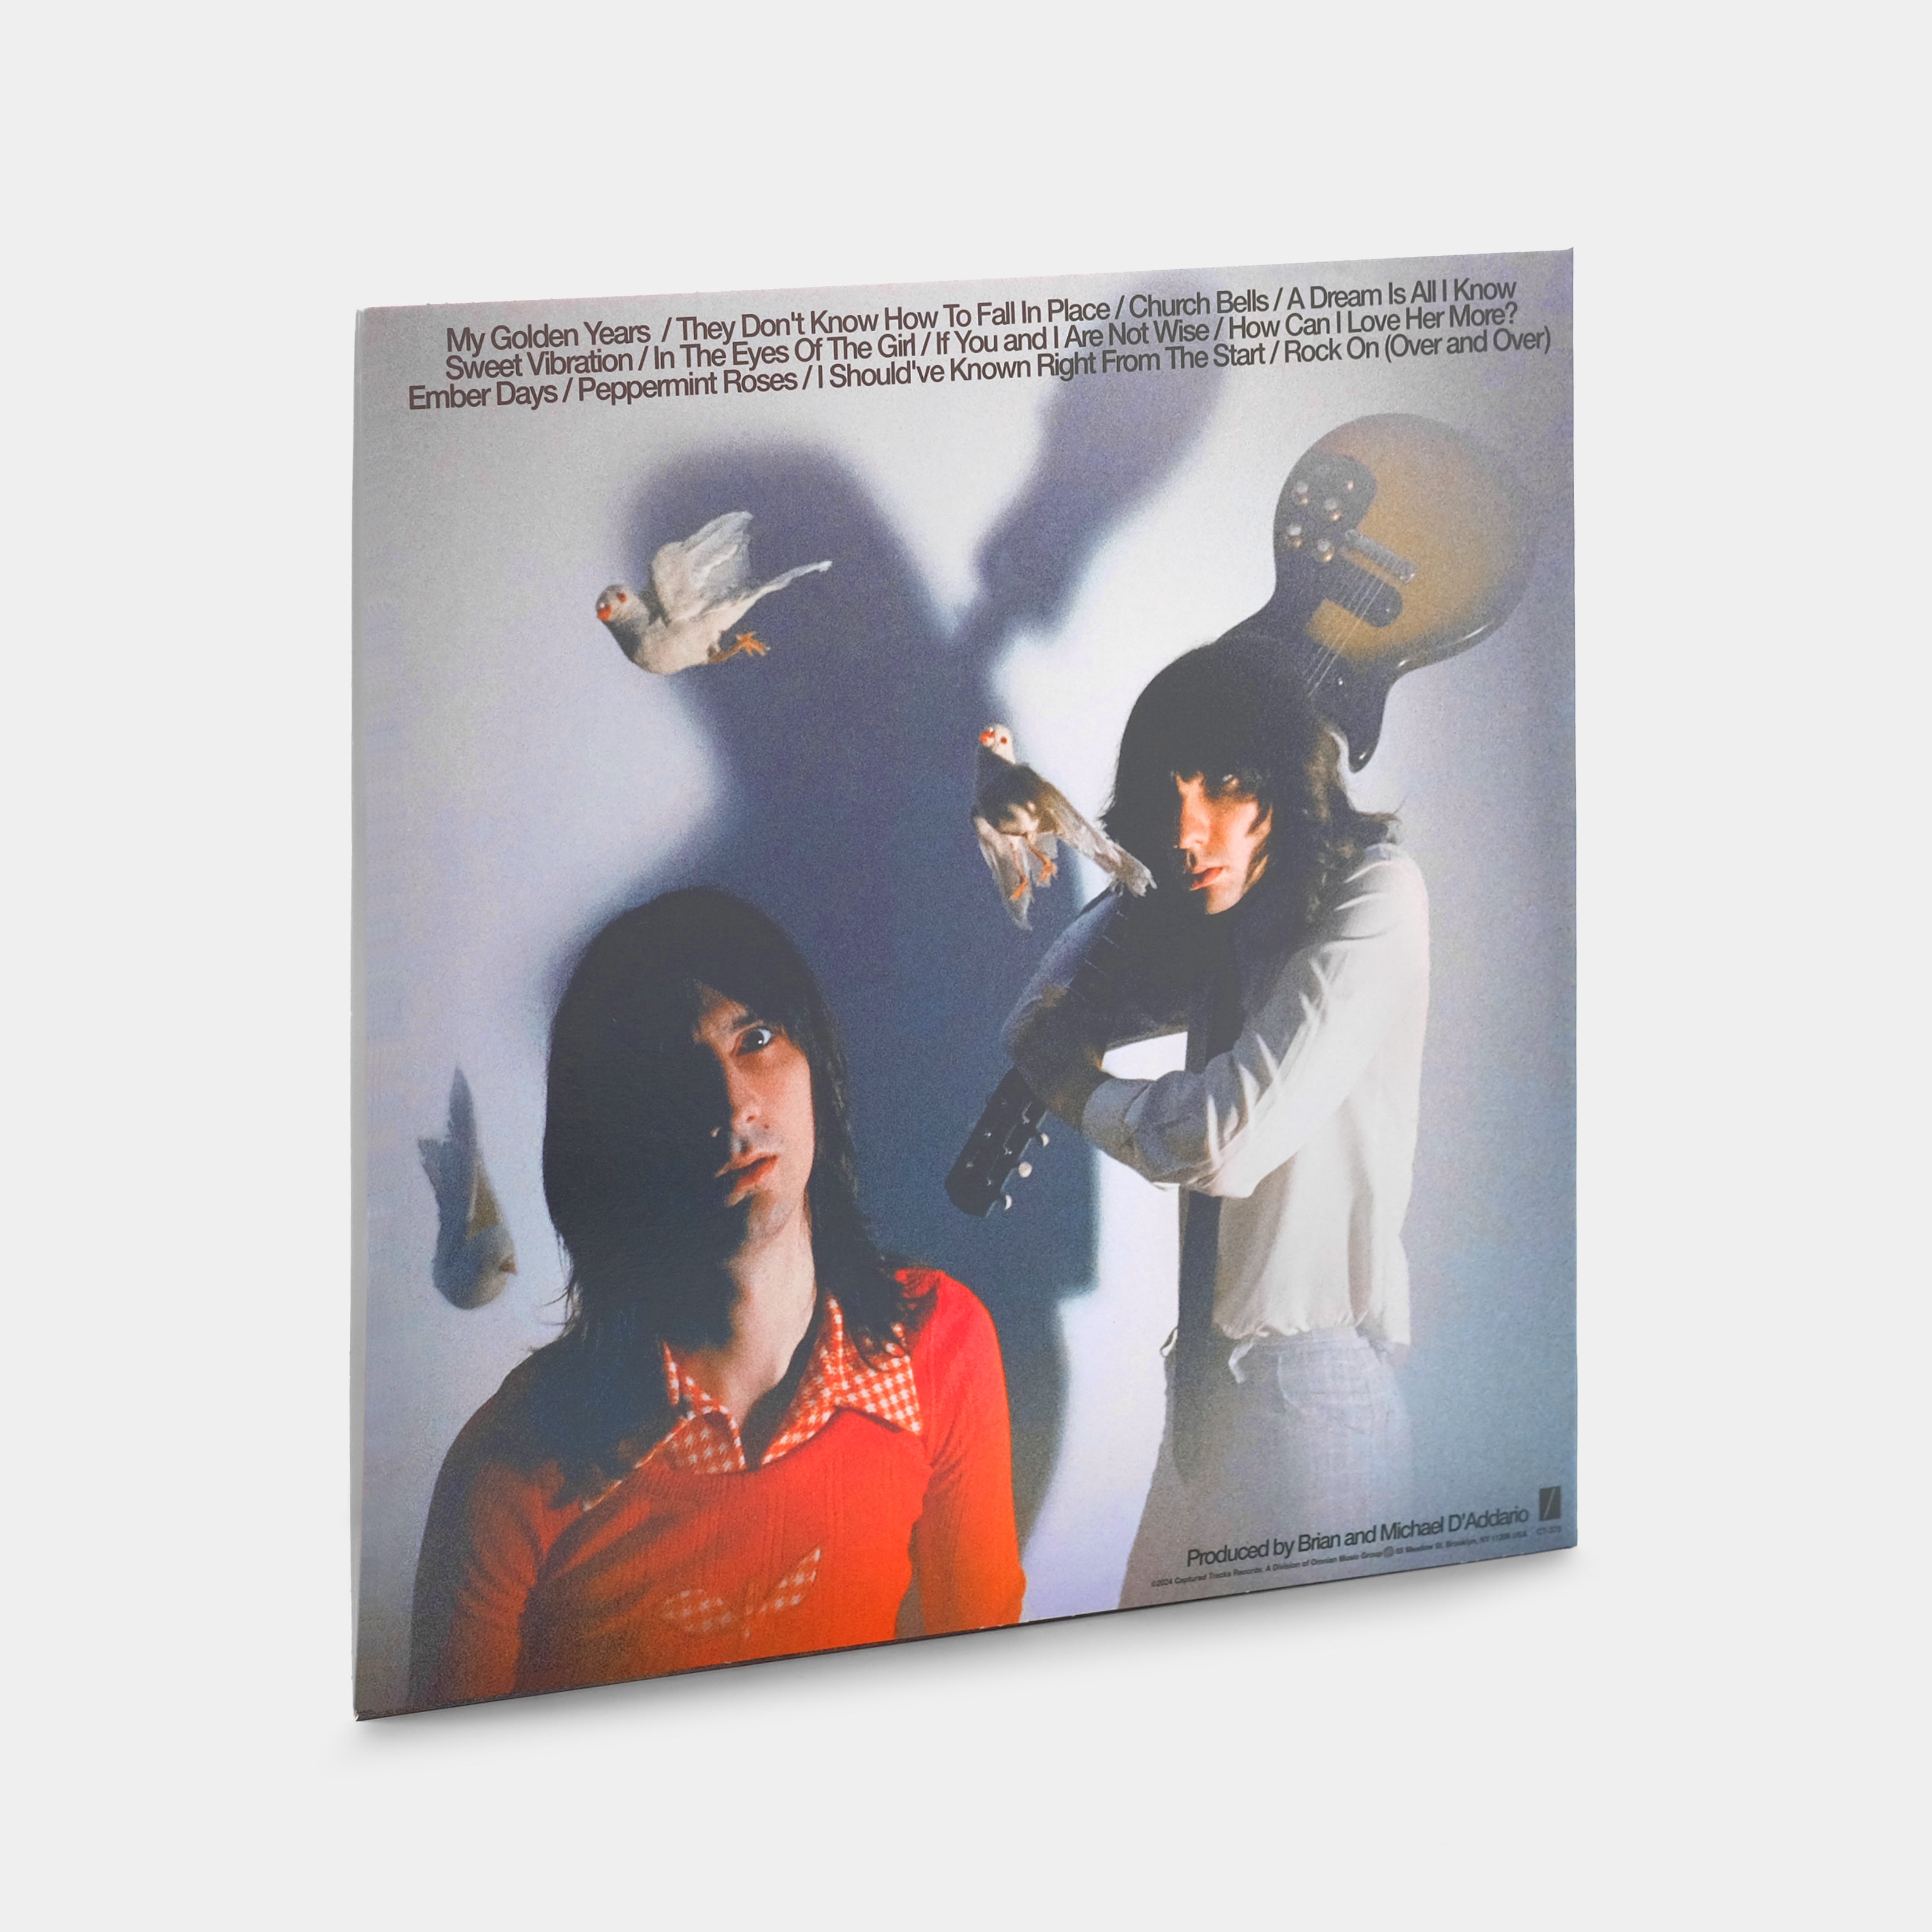 The Lemon Twigs - A Dream Is All We Know LP Ice Cream Vinyl Record